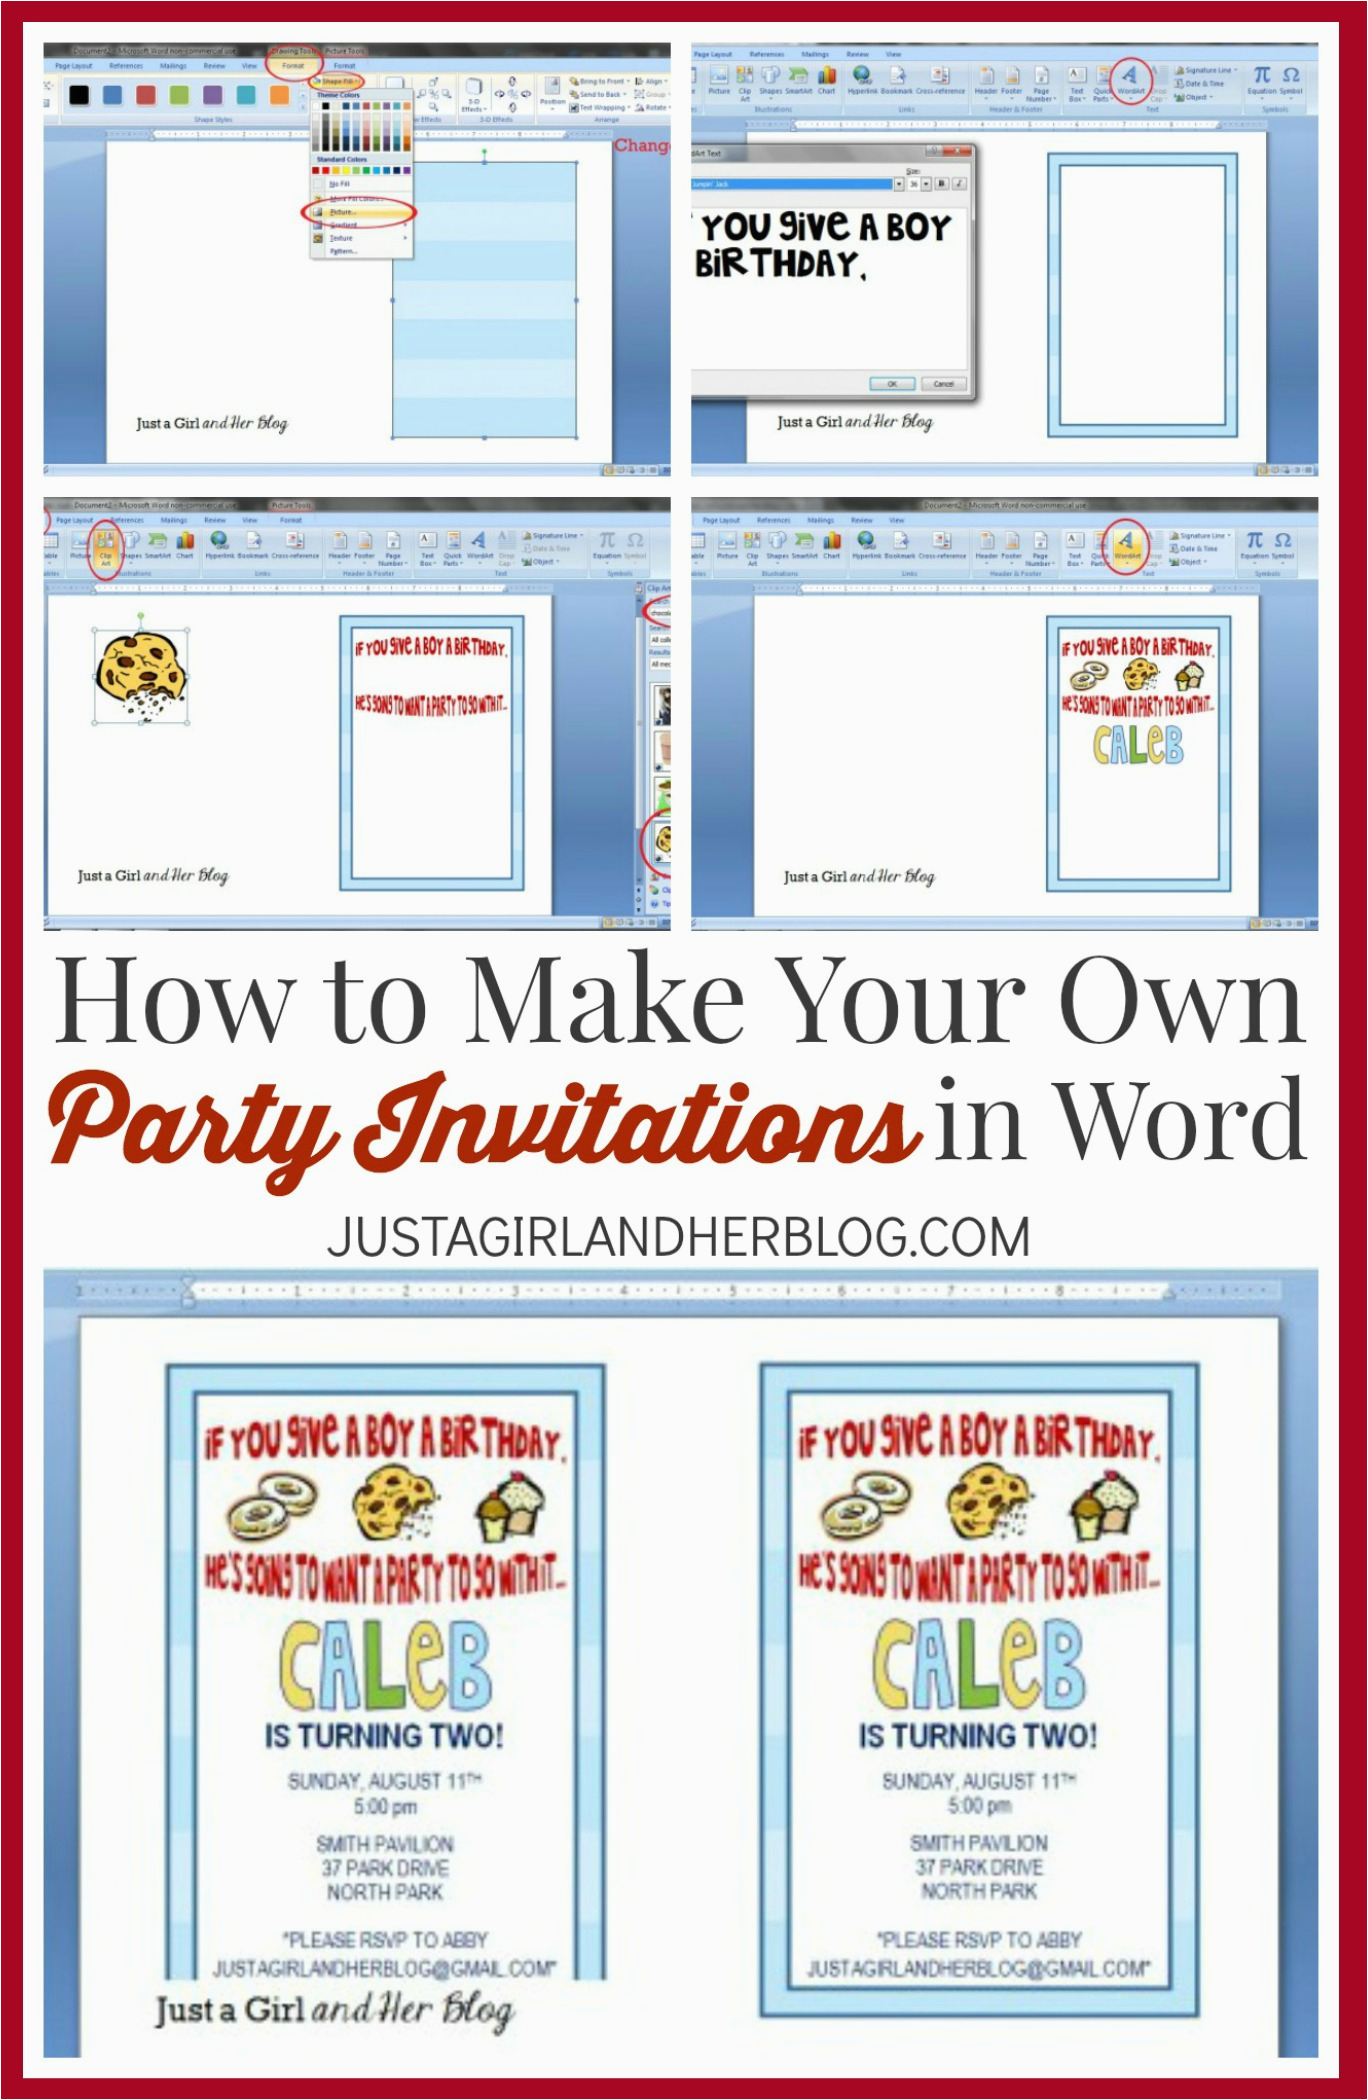 how to make your own party invitations just a girl and